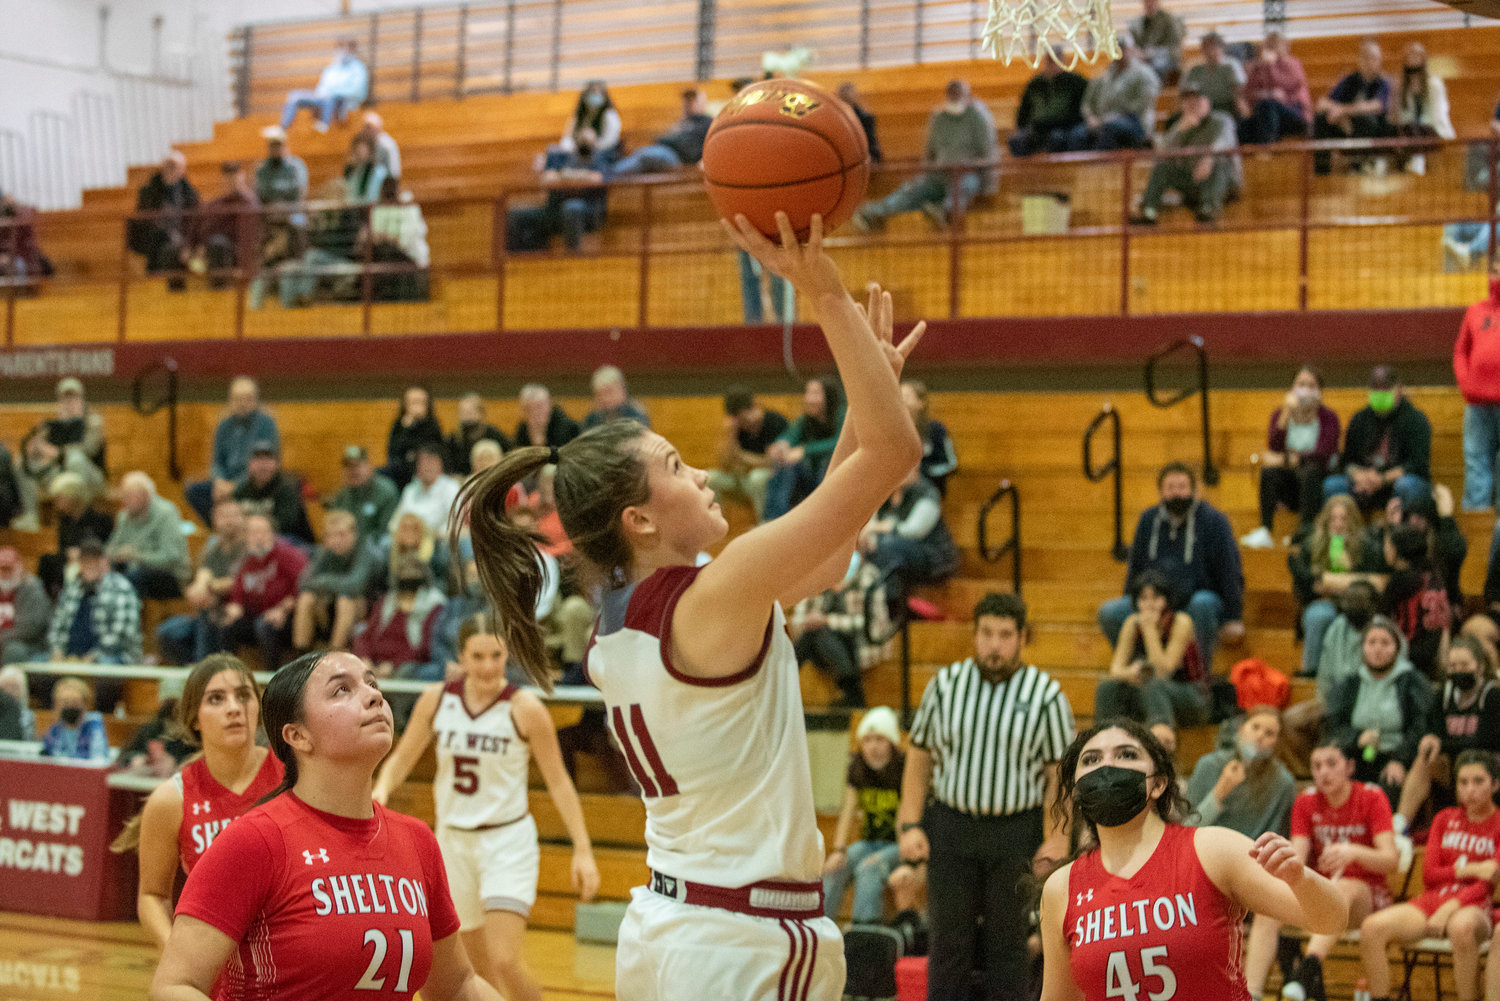 W.F. West's Olivia Remund (11) goes up for a layin against Shelton on Dec. 7.